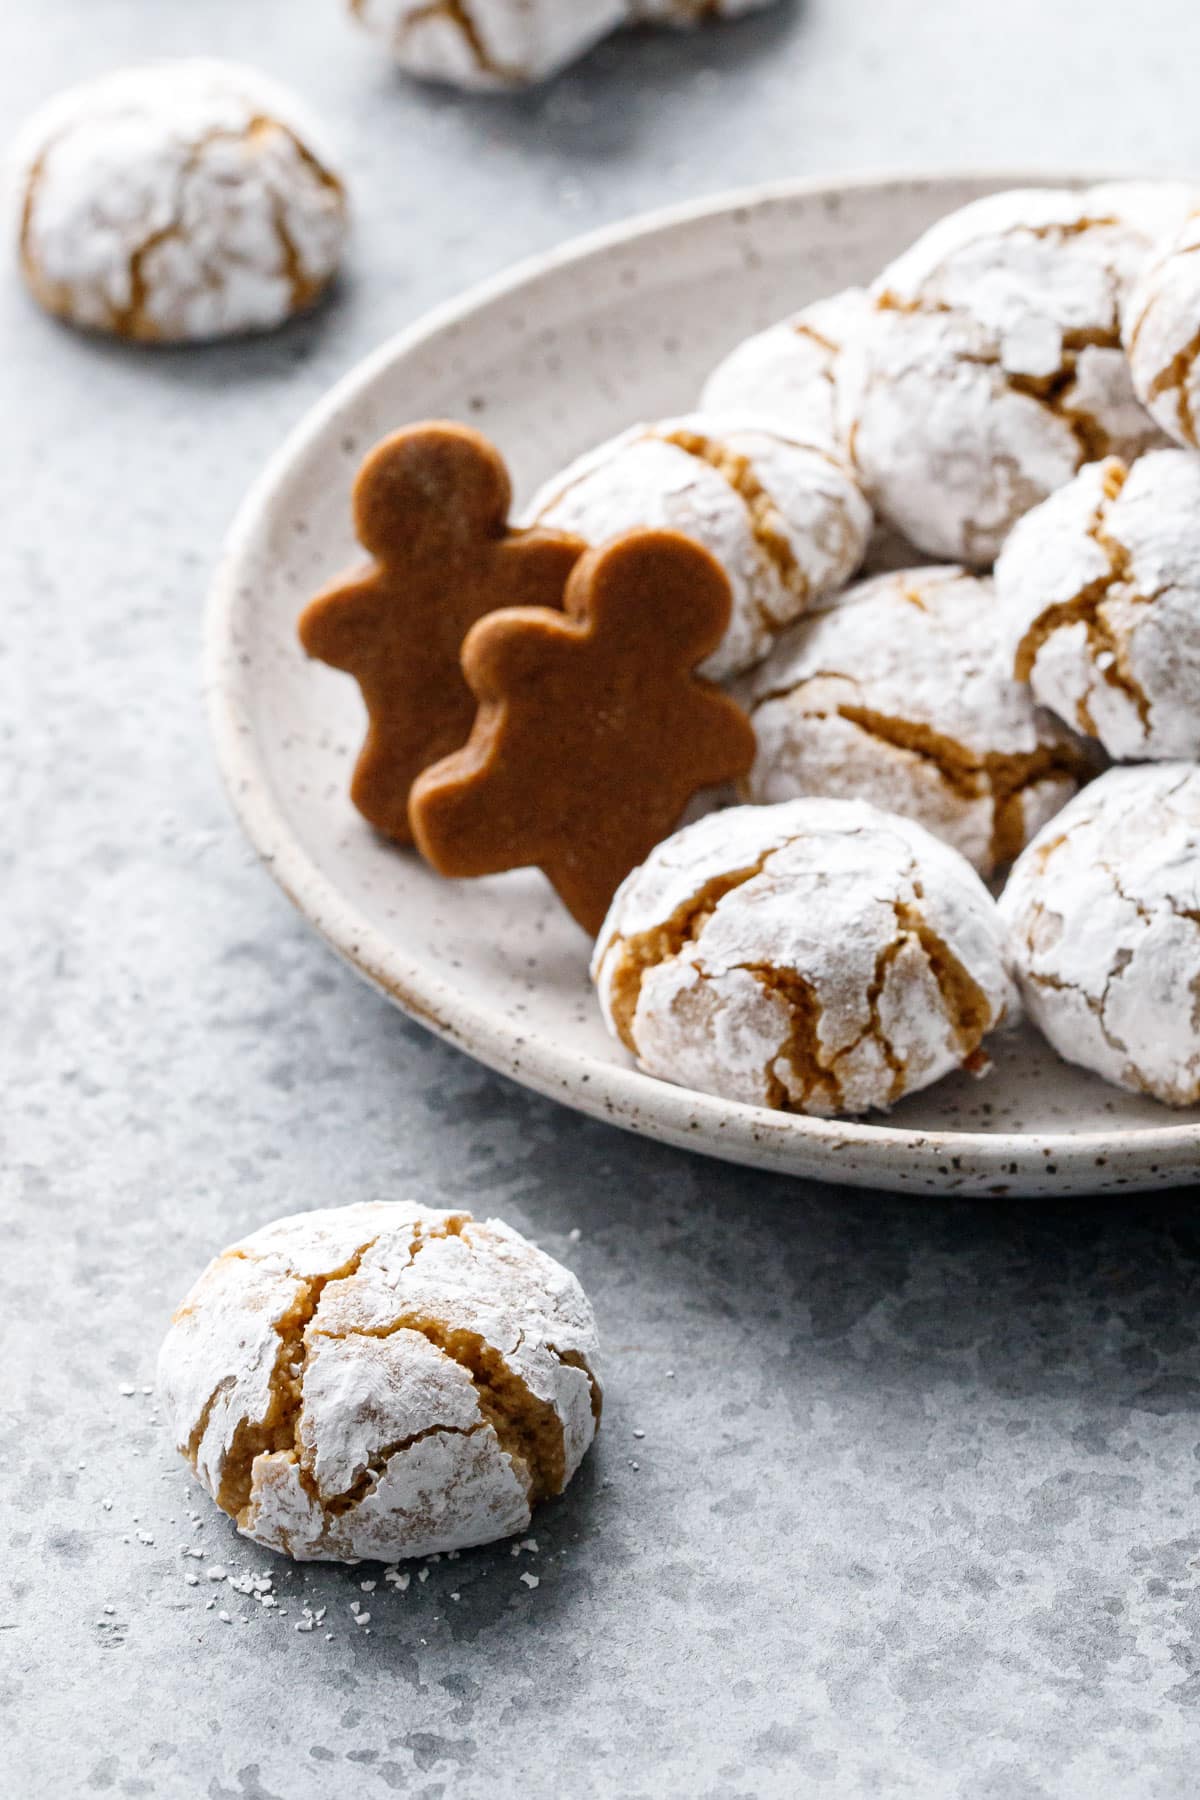 Closeup showing the crinkle appearance and powdered sugar coating of a Gingerbread Amaretti Cookie in the foreground, plate with more cookies and two small gingerbread men in the background.